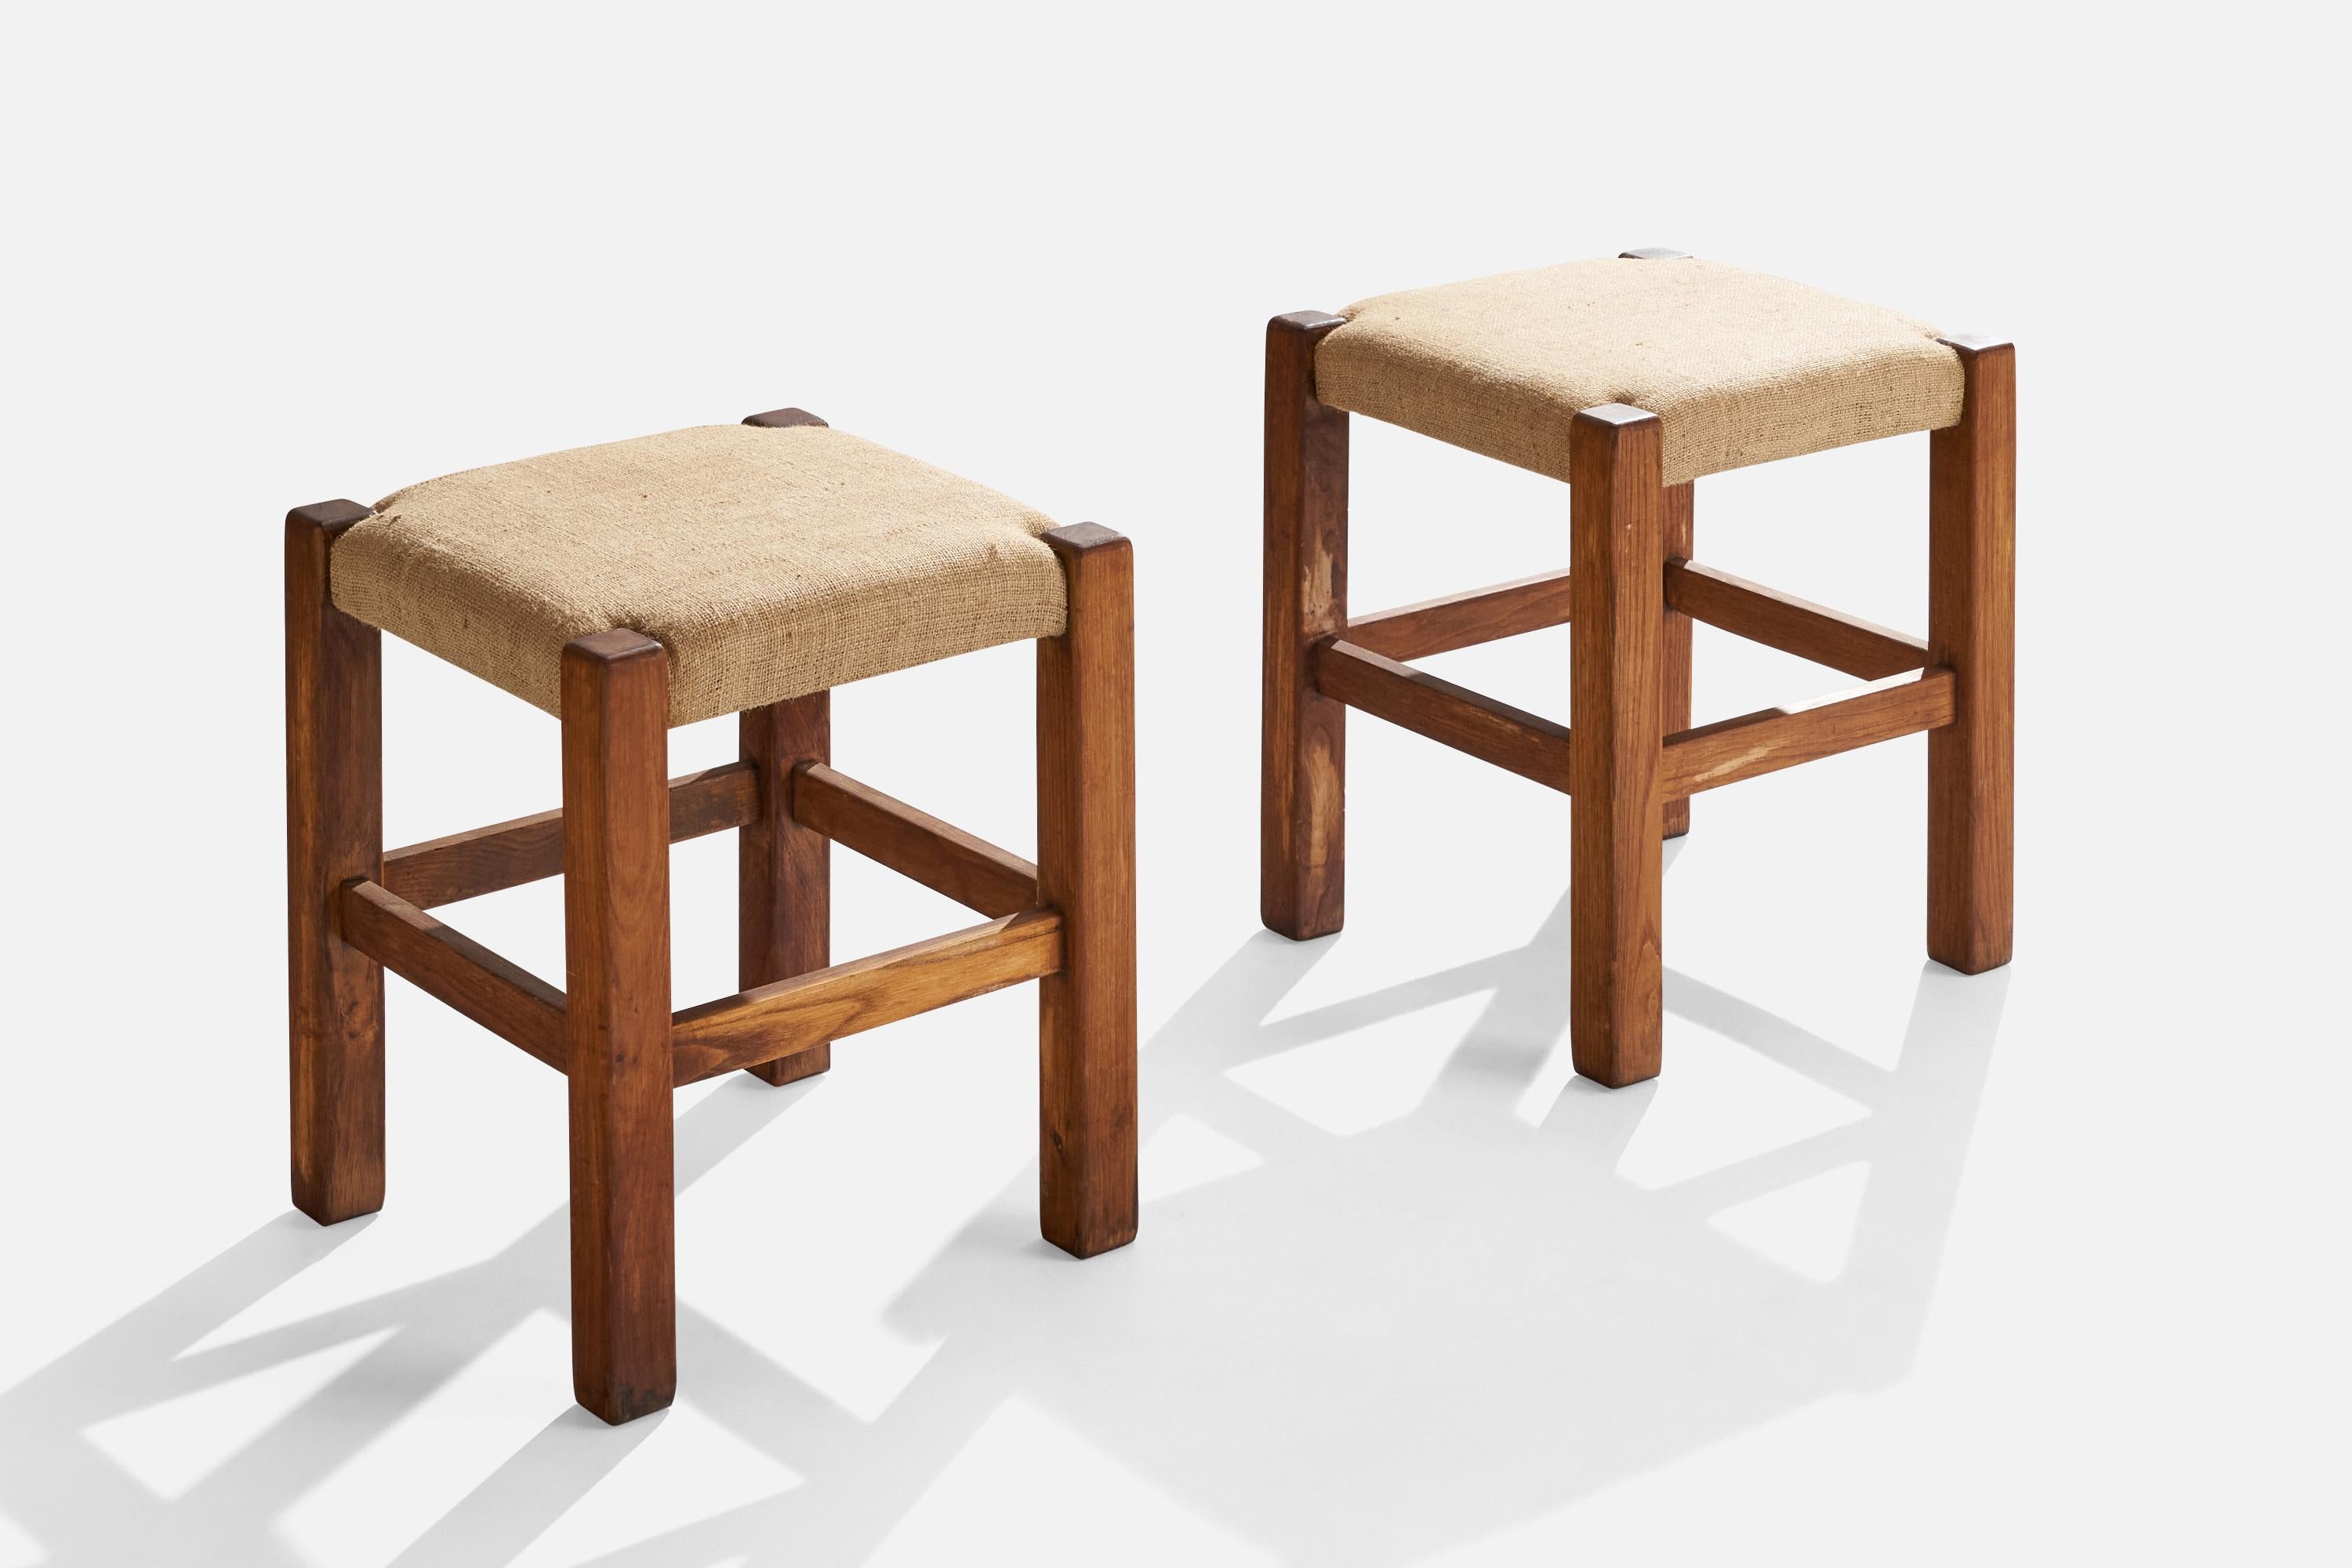 A pair of stained oak and raffia stools designed and produced in Italy, c. 1960s.

Seat height: 19.25”
